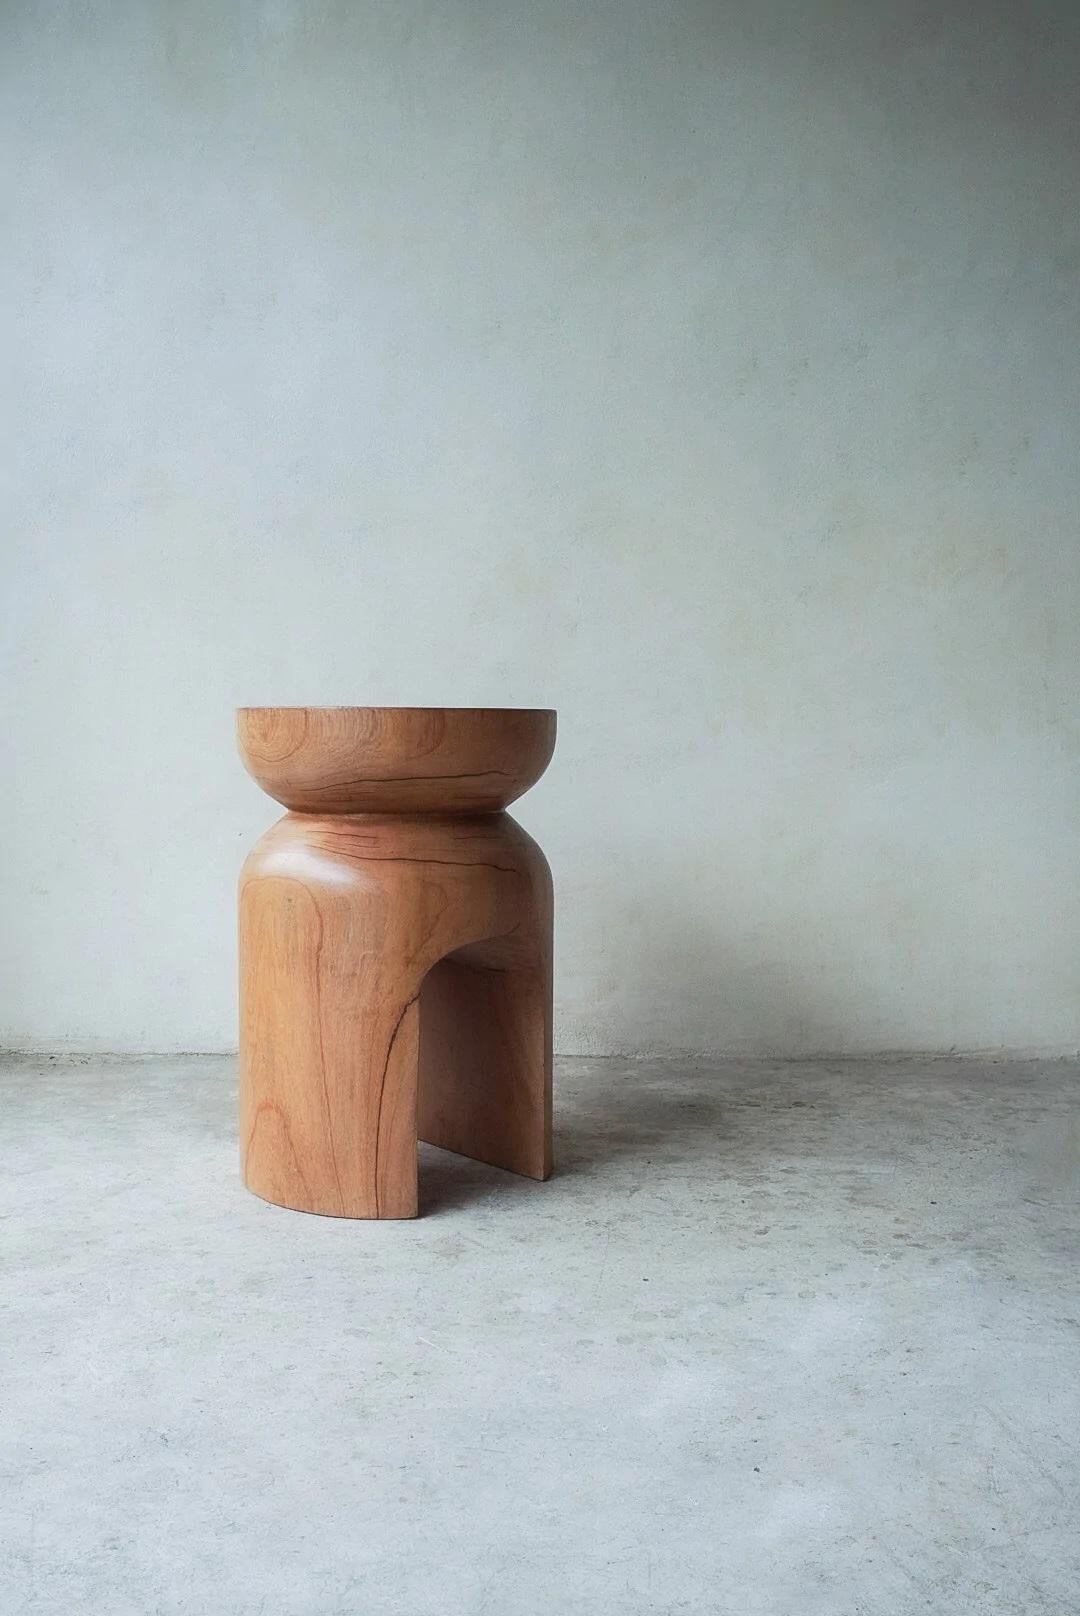 Natural Rounded totem by Daniel Orozco
Material: Solid wood.
Dimensions: D 35 x H 45 cm

Rounded solid wood Totem with hole in between, natural finish. Handmade by Mexican artisans.

Daniel Orozco Estudio
We are an inclusive interior design estudio,